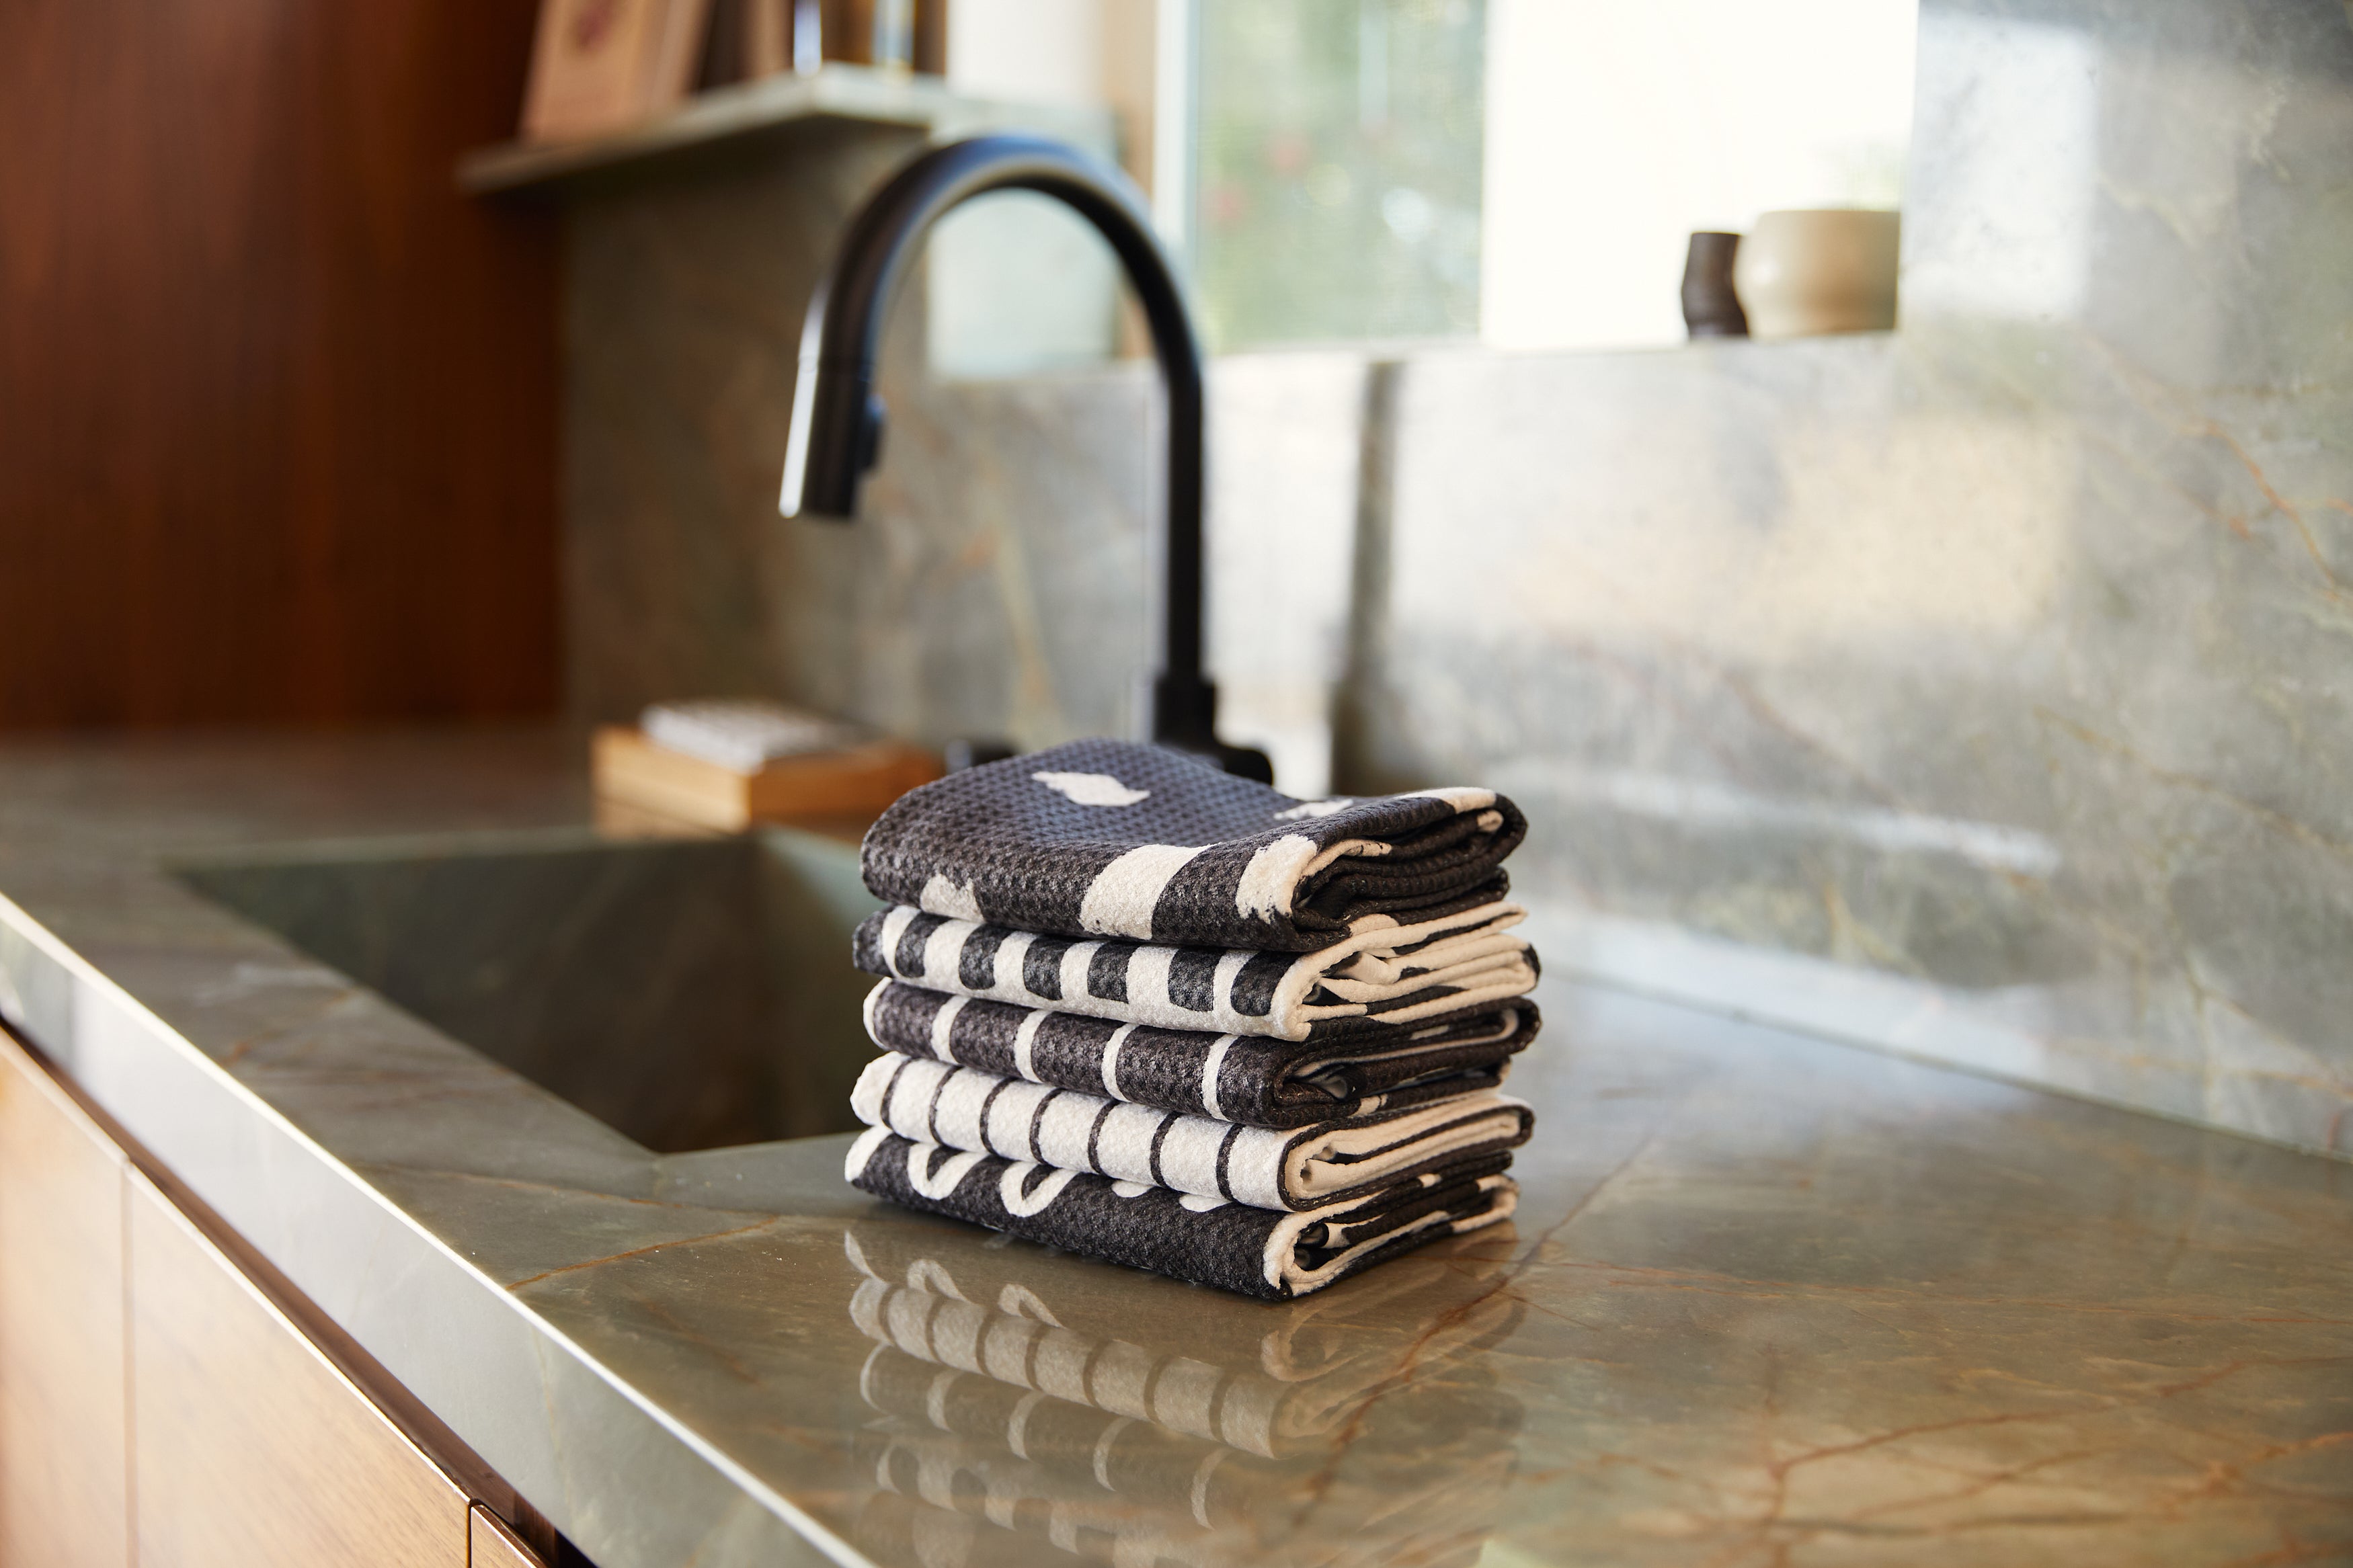 Geometry Kitchen Towels Review + Coupon Code